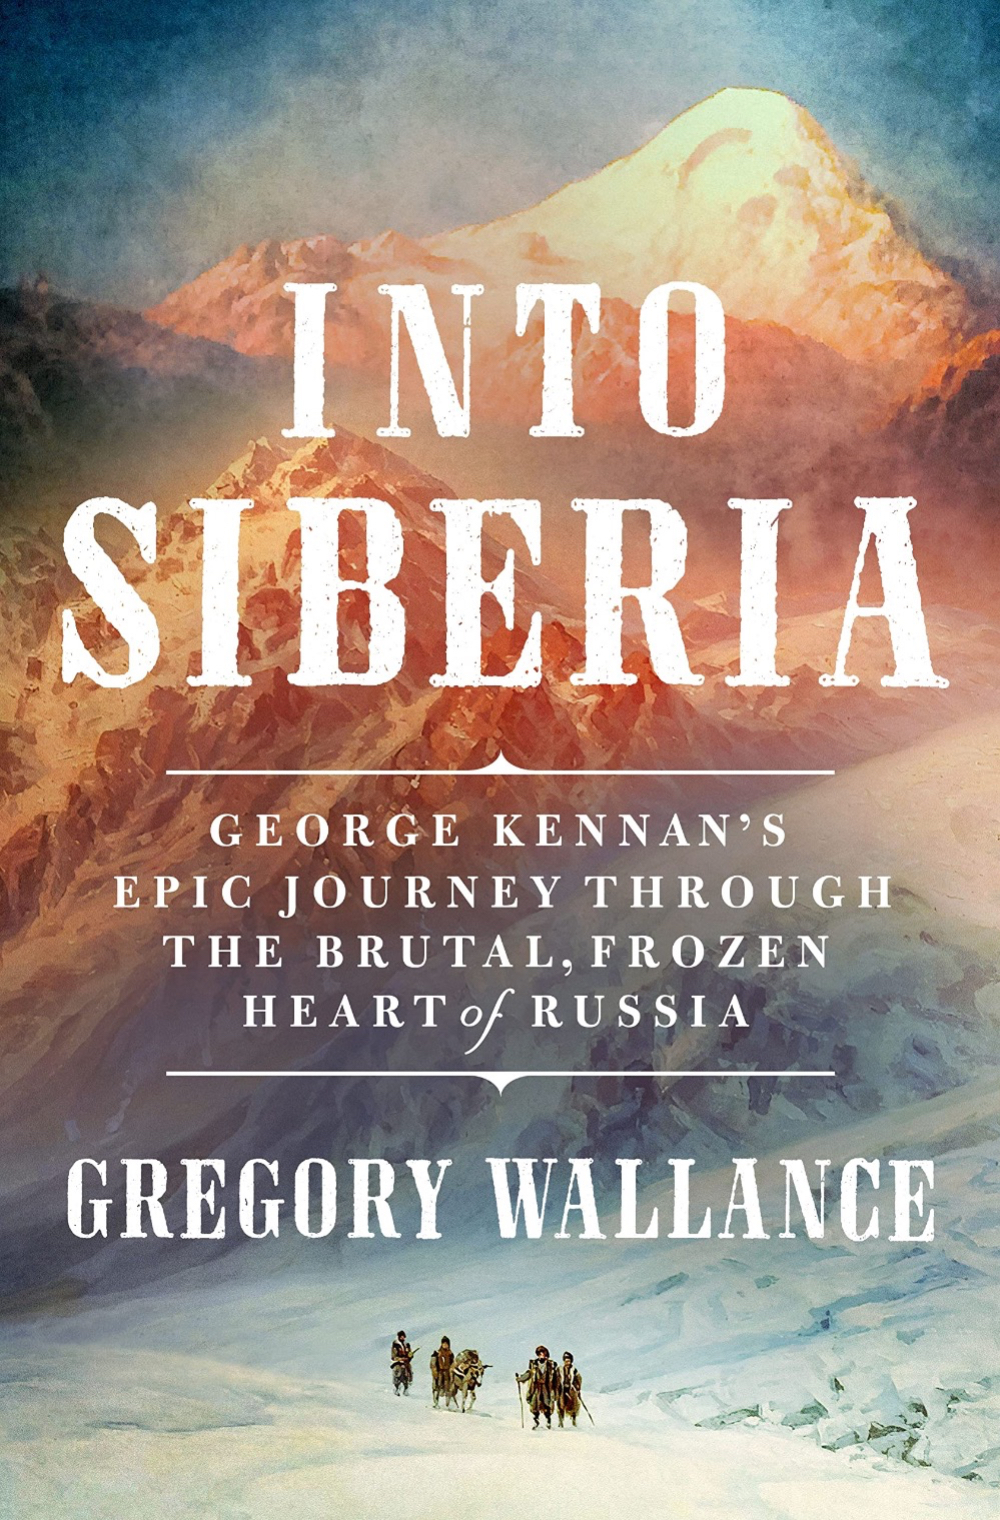 Into Siberia by Gregory Wallance